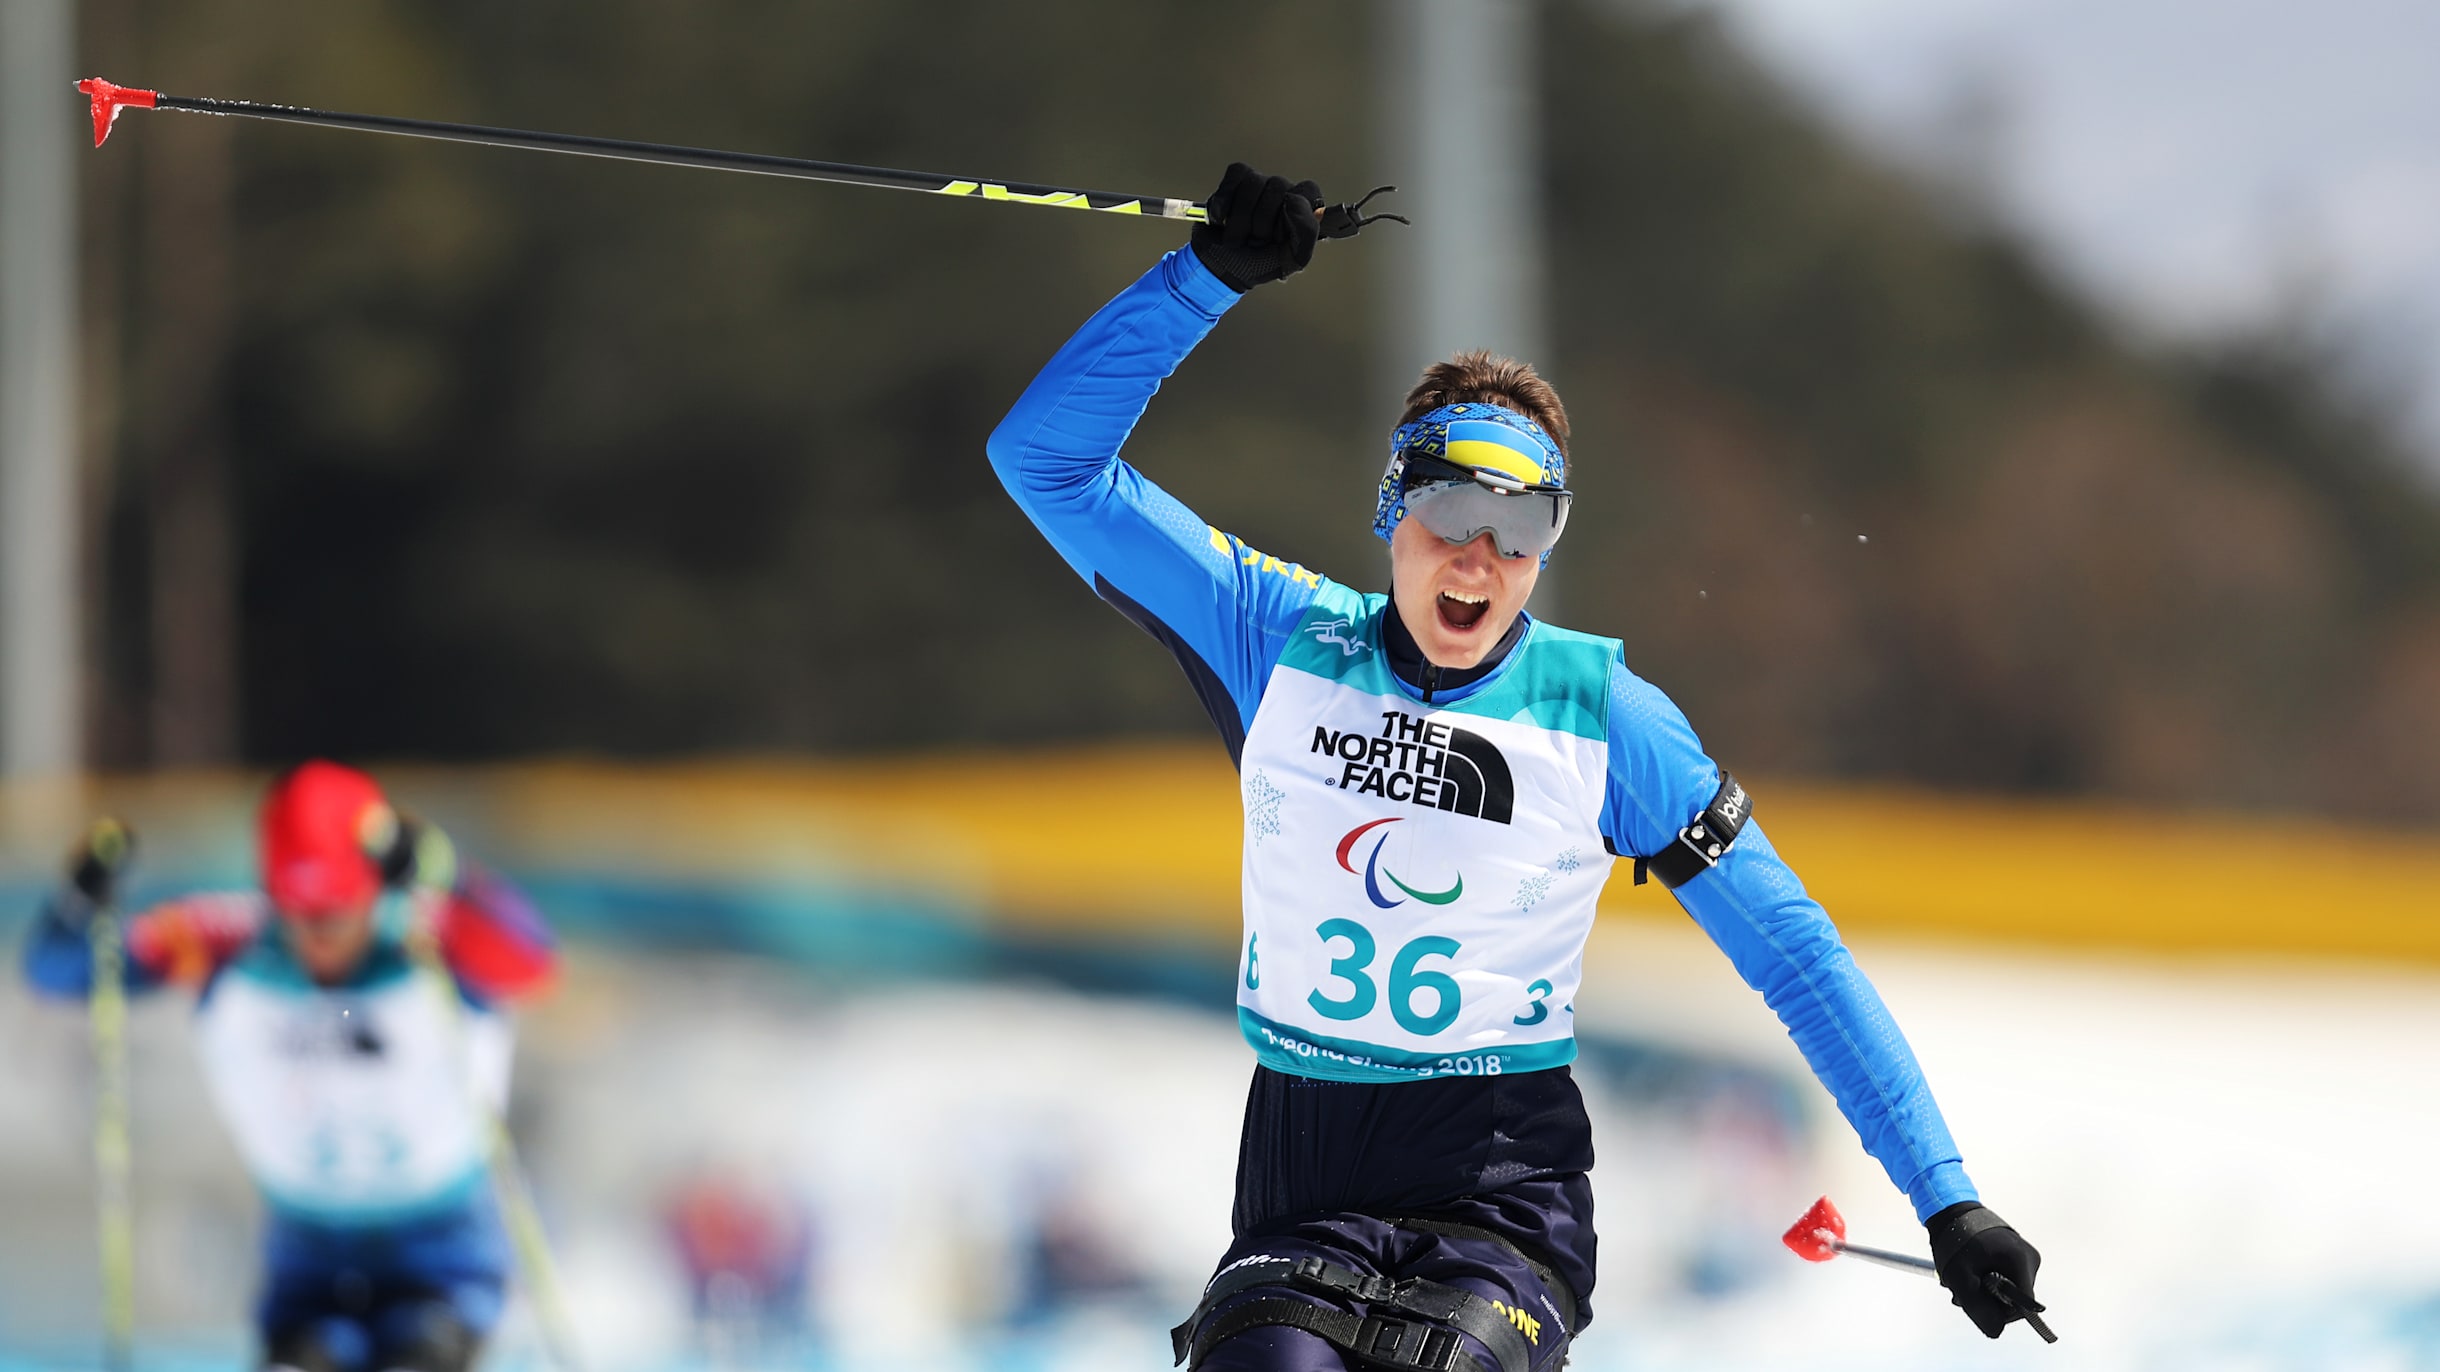 VISUALLY IMPAIRED SPORTS IN THE 2022 WINTER PARALYMPICS - VIA